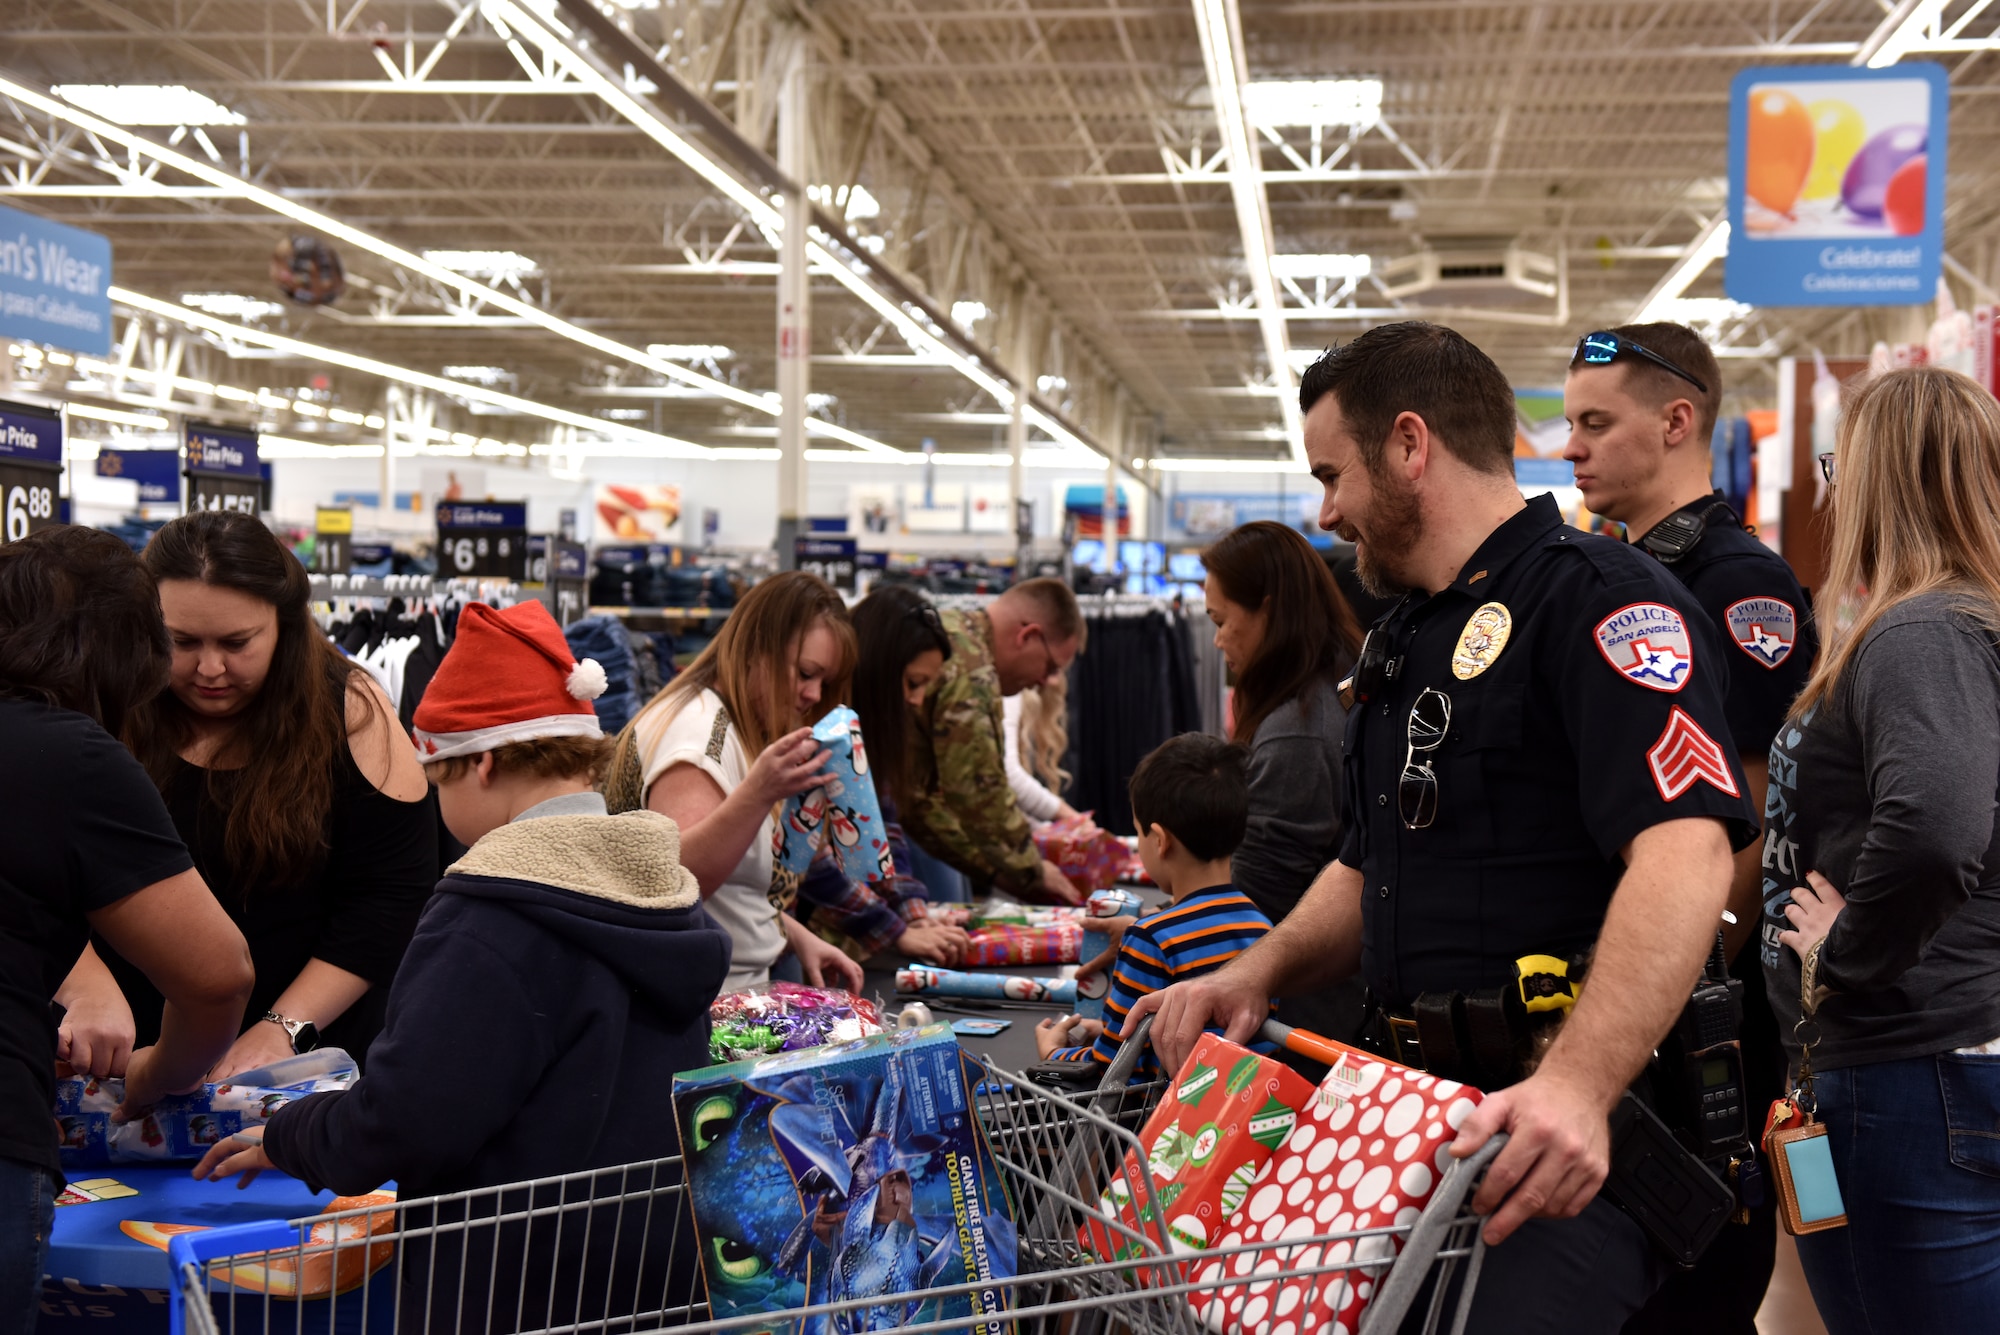 Volunteers wrap gifts purchased during the Operation Blue Santa Shop with a Cop event in San Angelo, Texas, Dec. 14, 2019. Refreshments were provided for the volunteers and participants at the event. (U.S. Air Force photo by Senior Airman Seraiah Wolf)